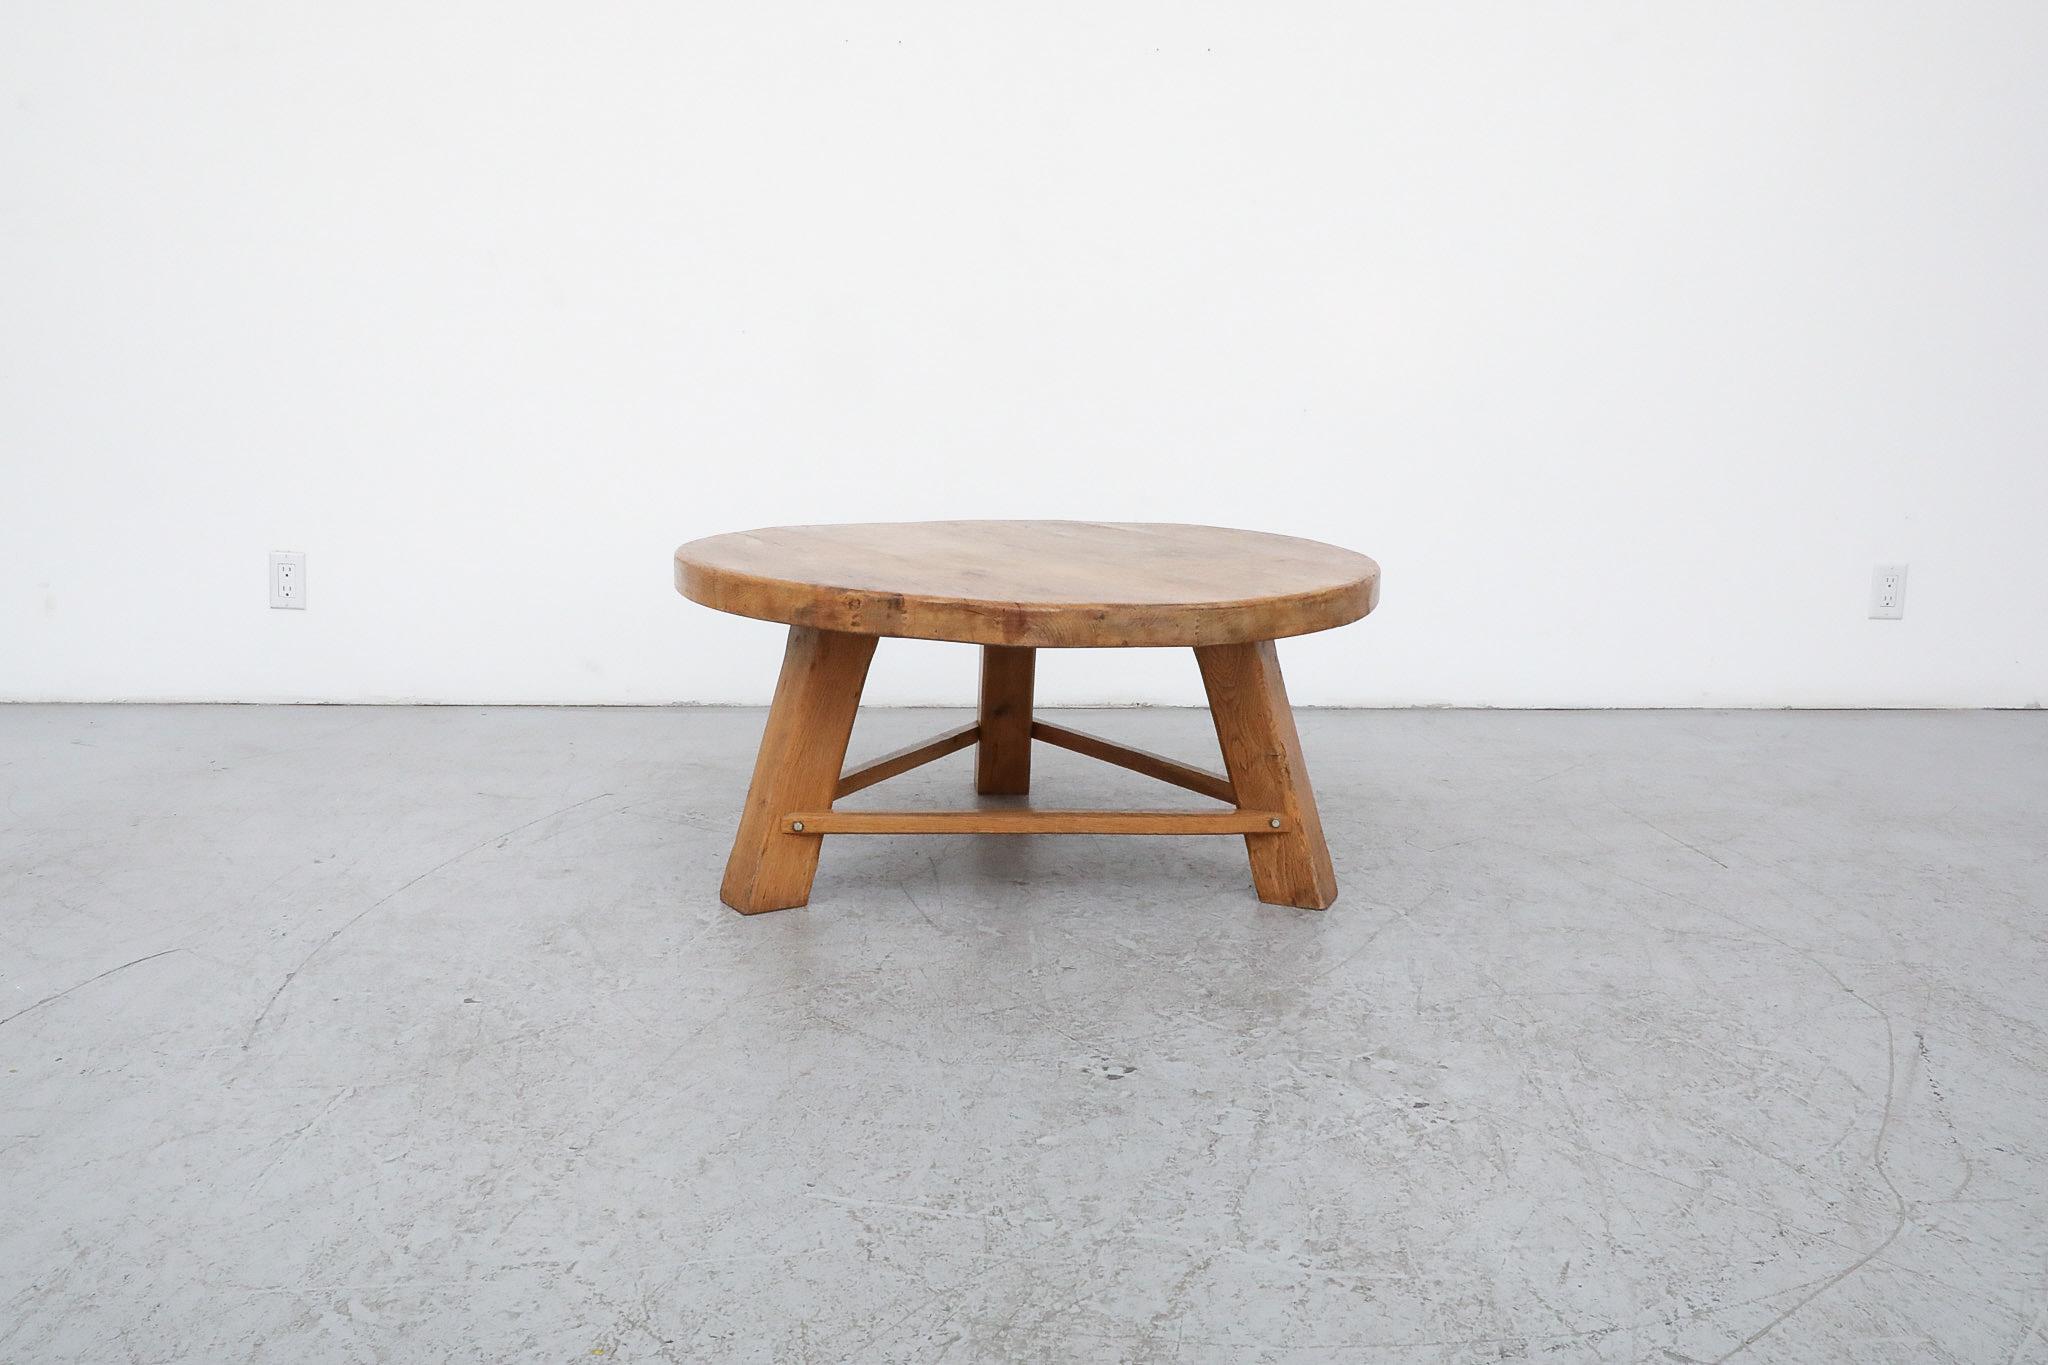 This beautiful, Mid-Century Chapo inspired Brutalist coffee table is made from solid oak with a round top, tripod legs and triangle support bar connecting the legs. In original condition with visible wear, including some natural cracking. Wear is